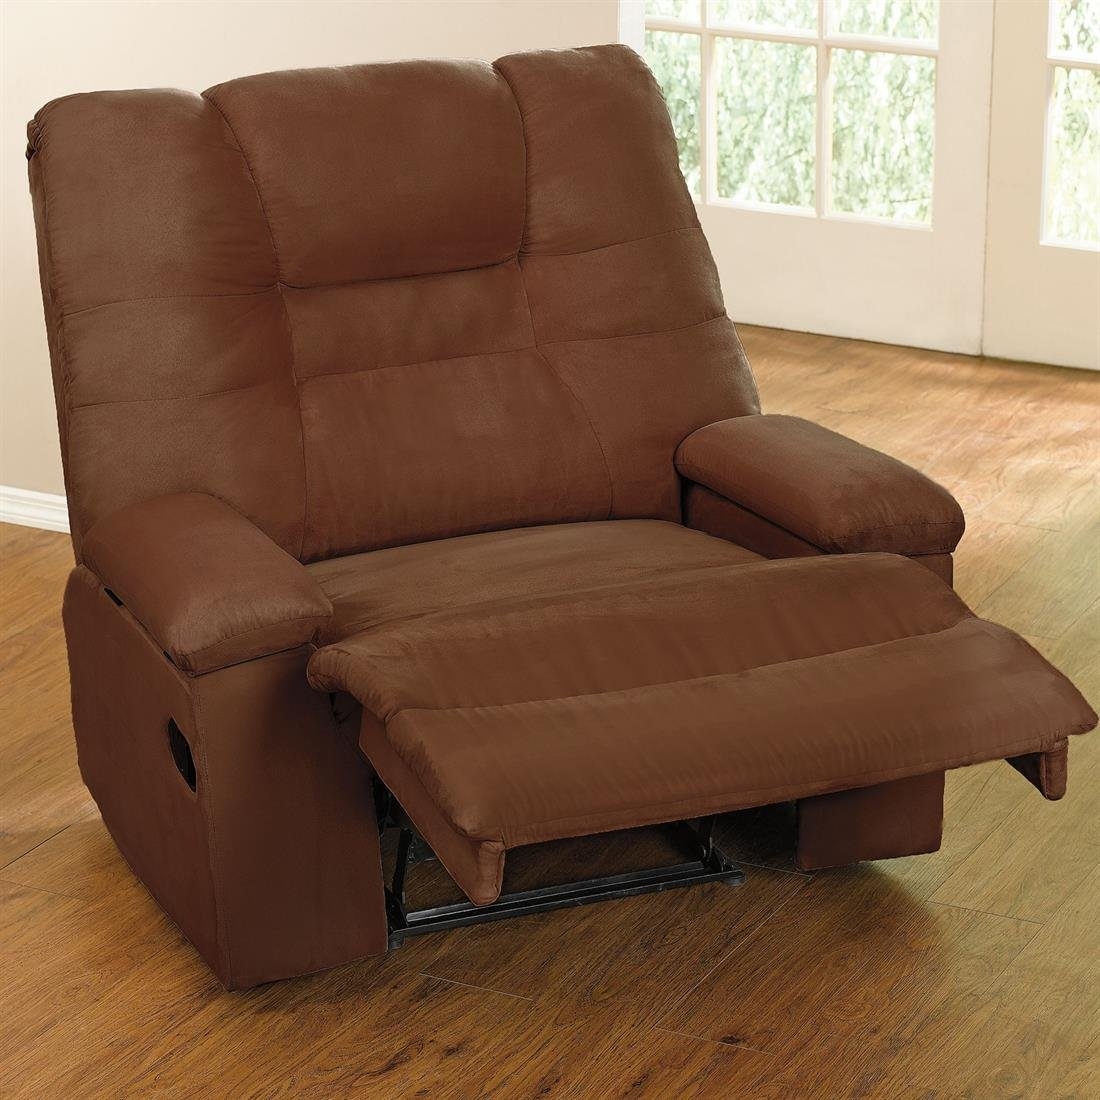 X large recliner